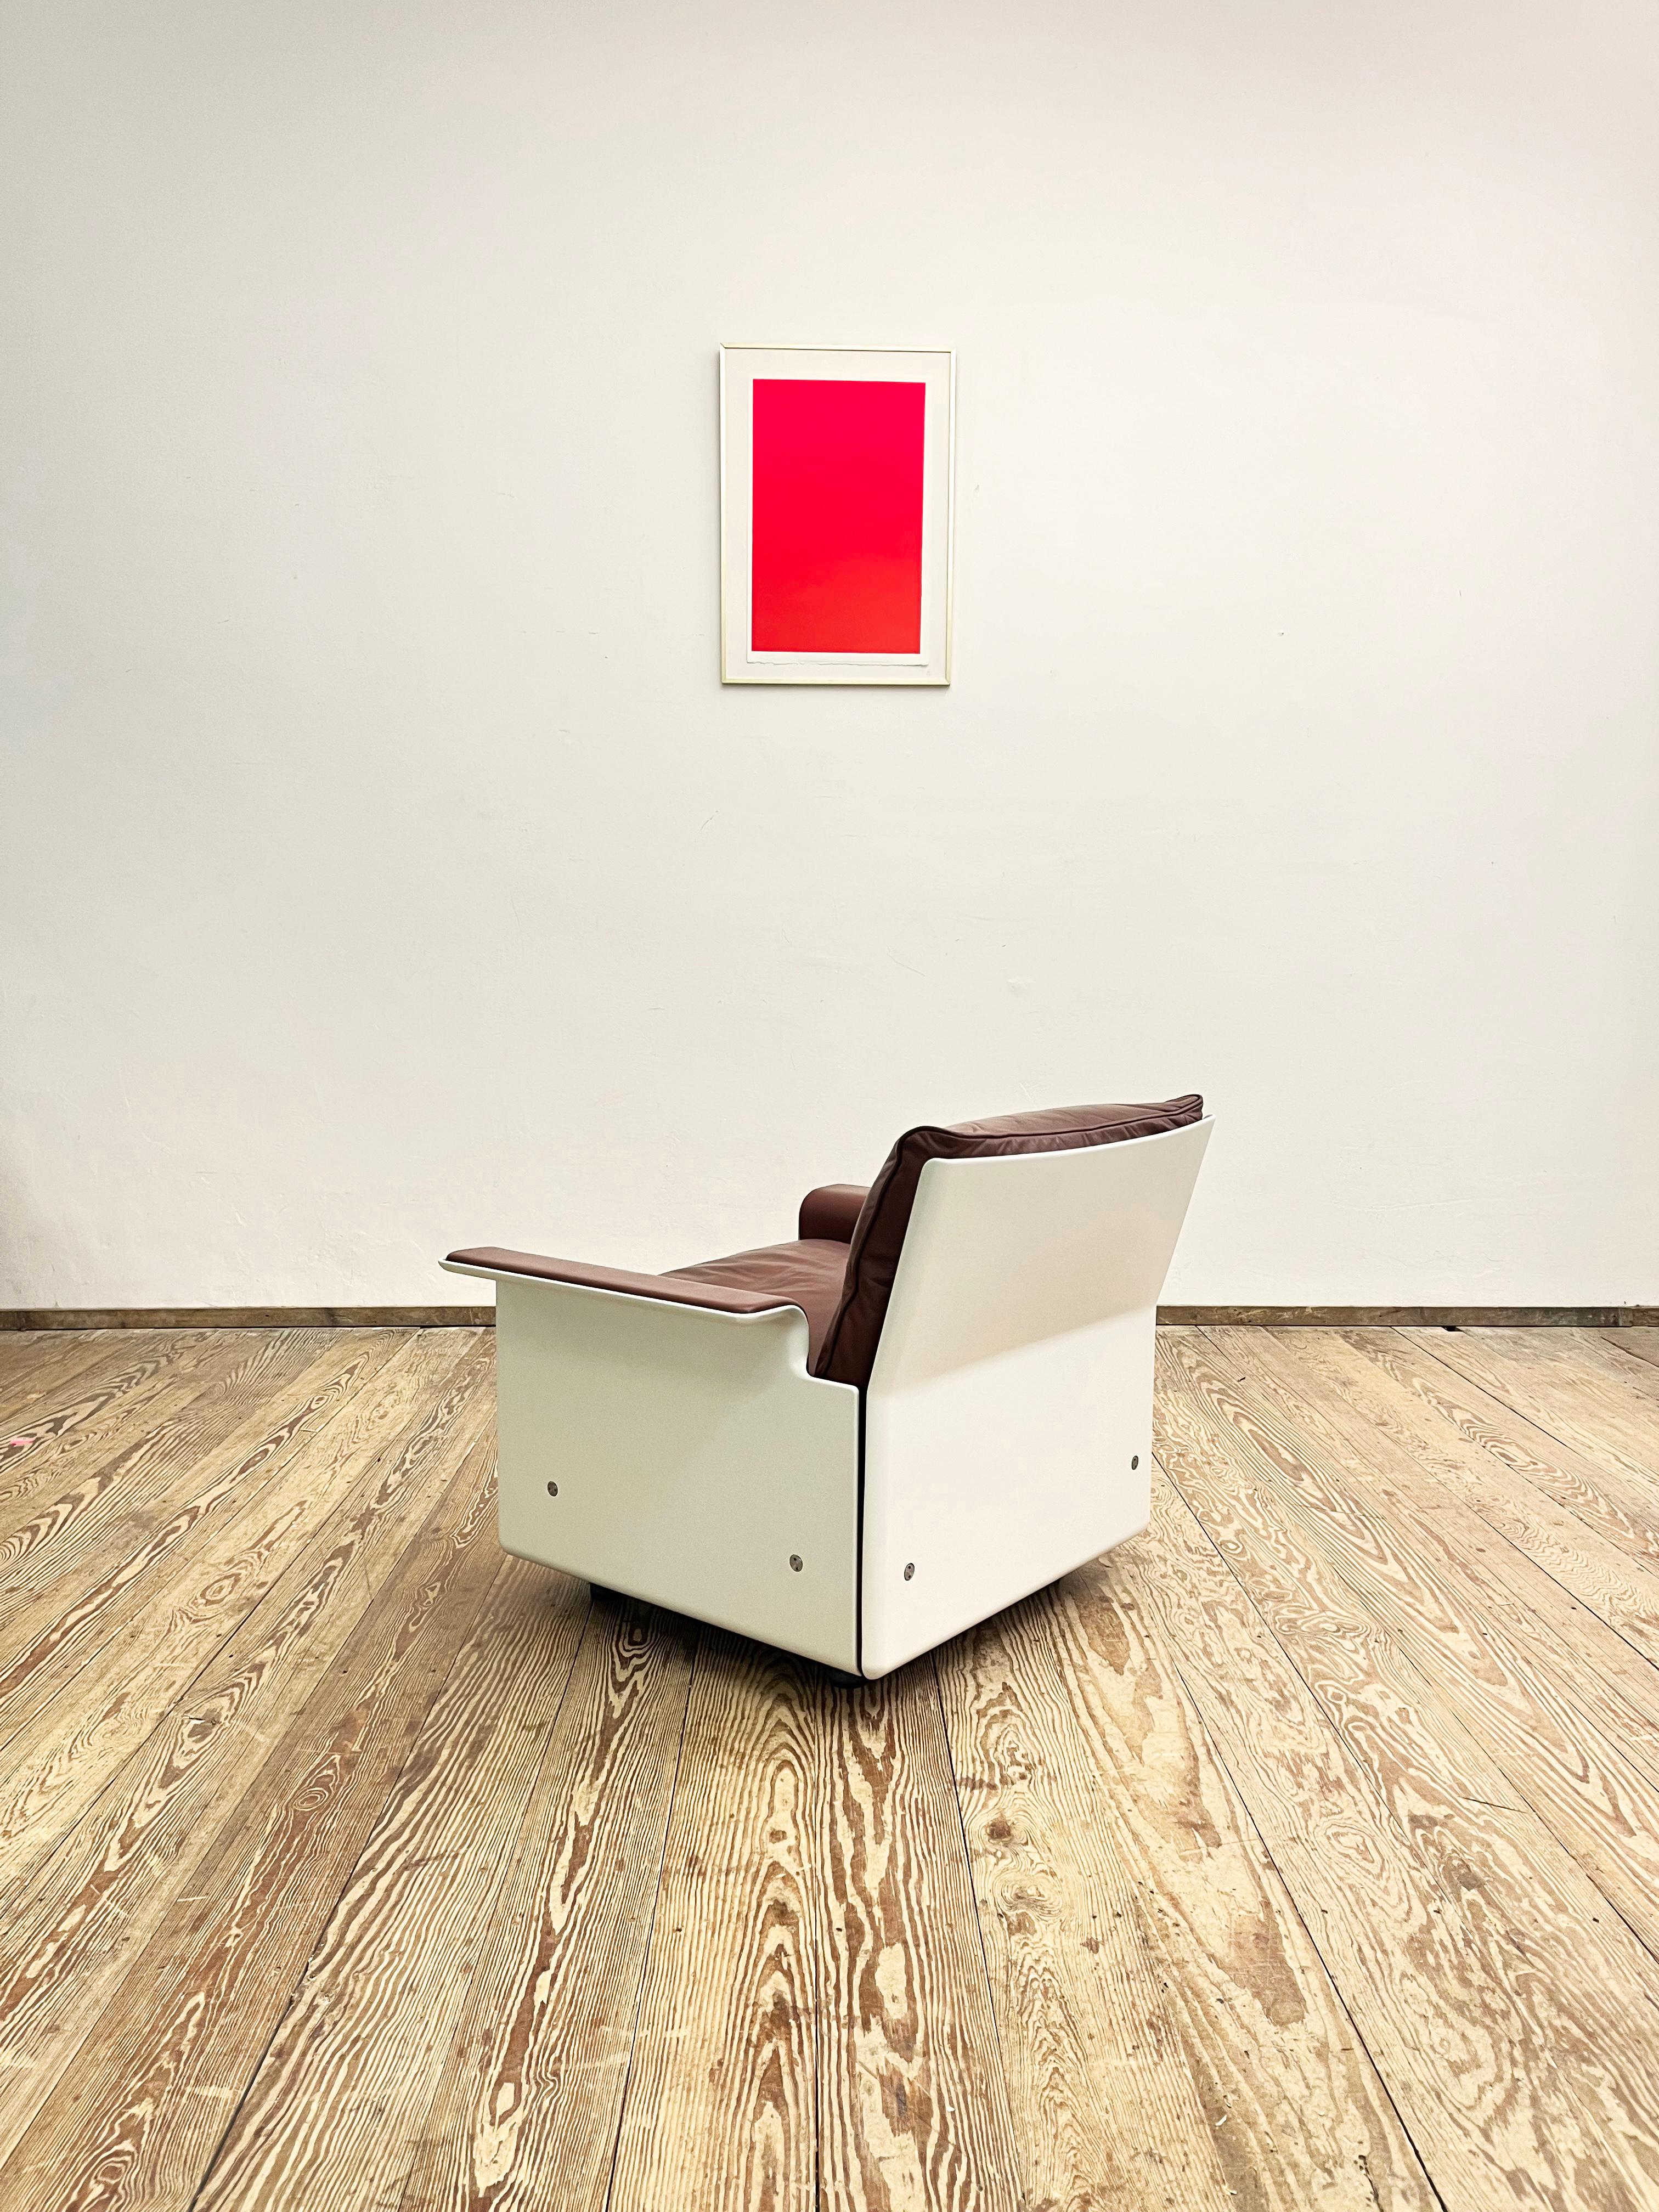 Mid-20th Century Mid-Century Lounge or Armchair by Dieter Rams for Vitsoe, German Design, 1960s